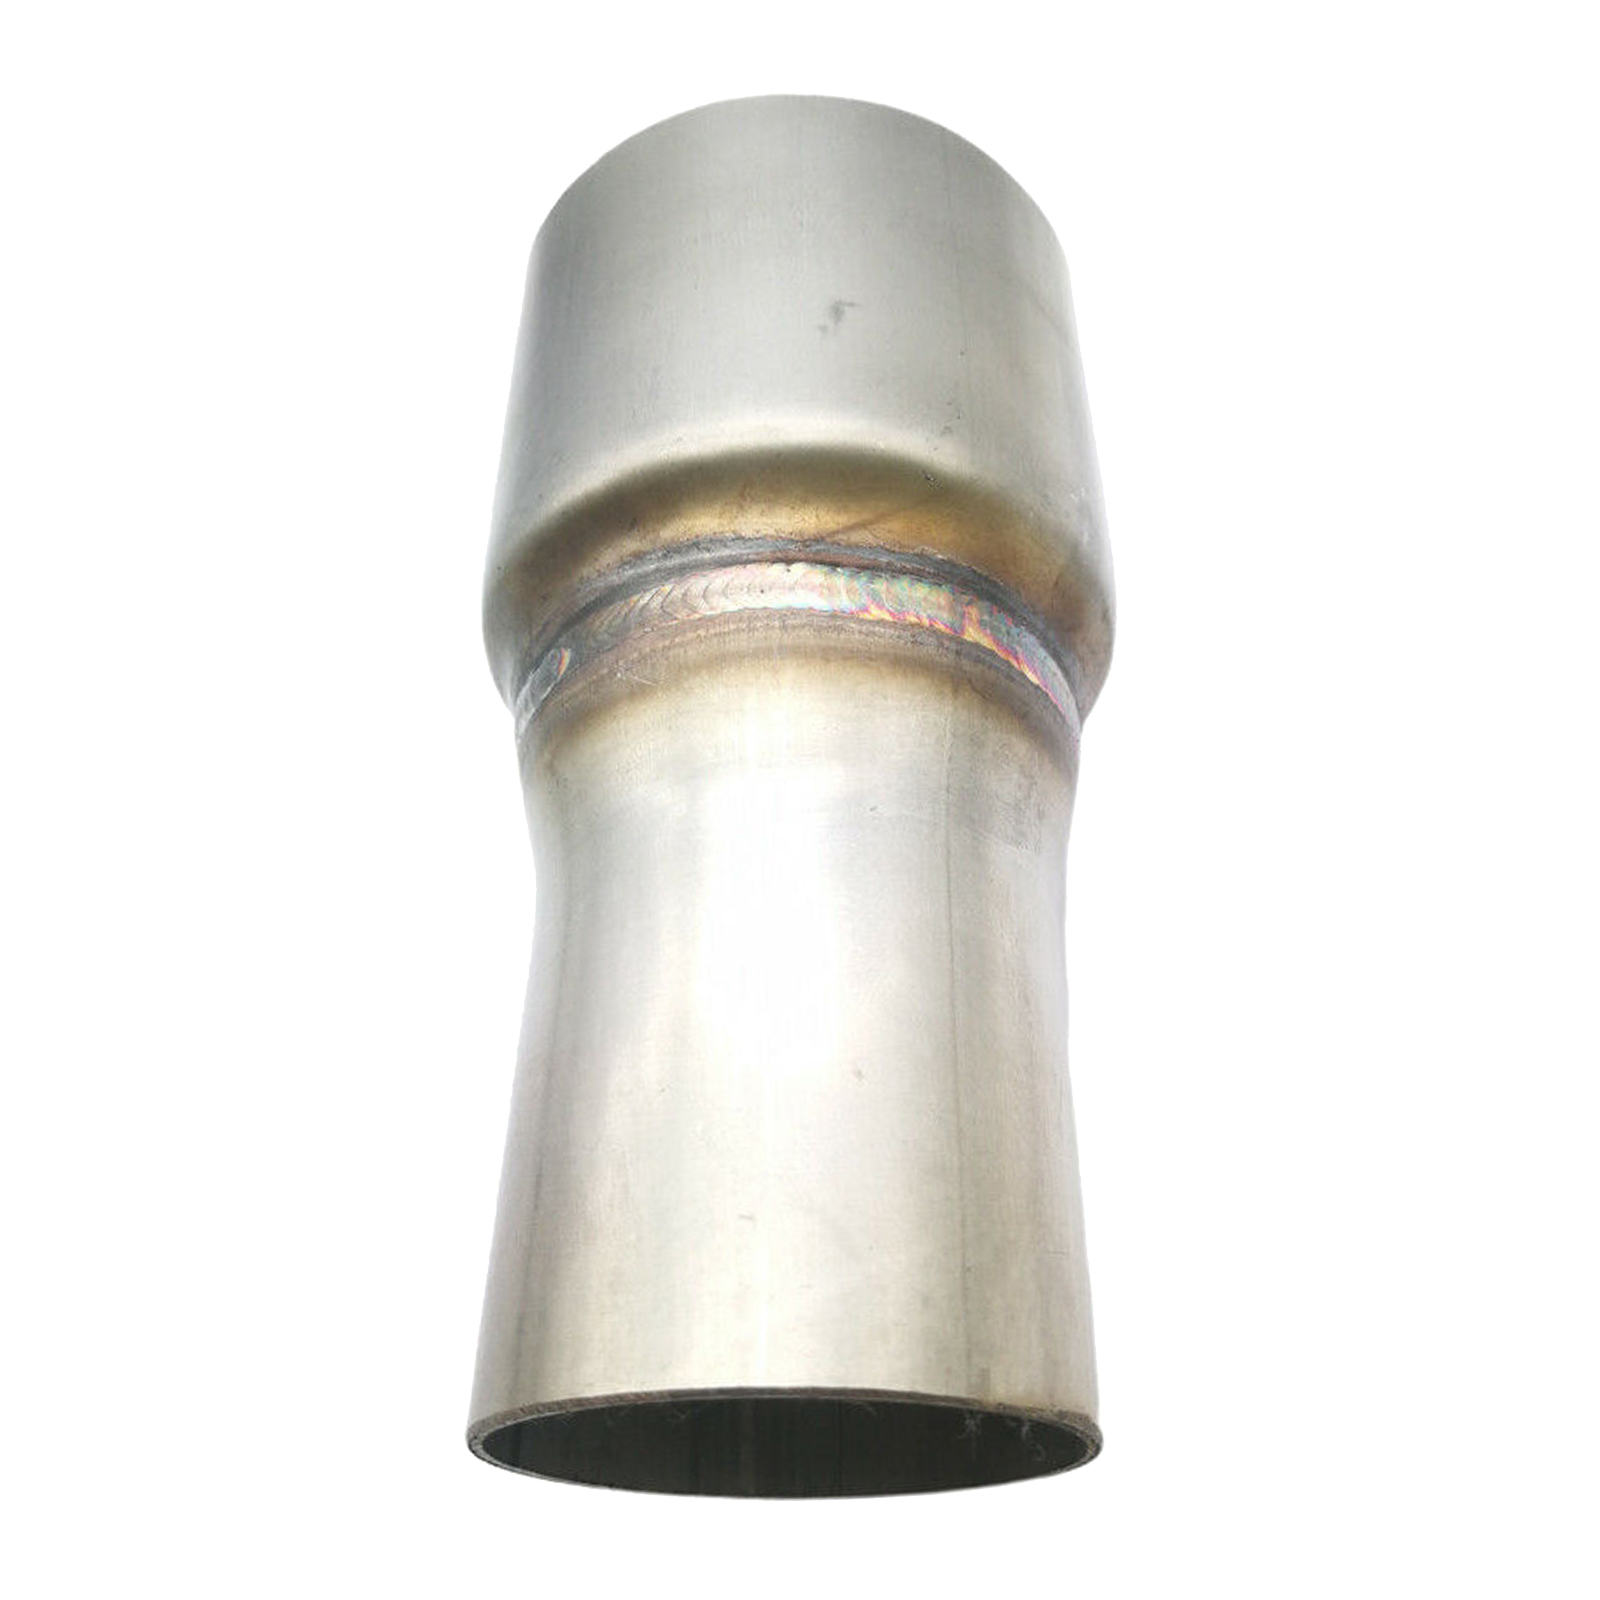 2.5" to 1.75" Tapered Exhaust Reducer Connector Tube Stainless Steel Parts